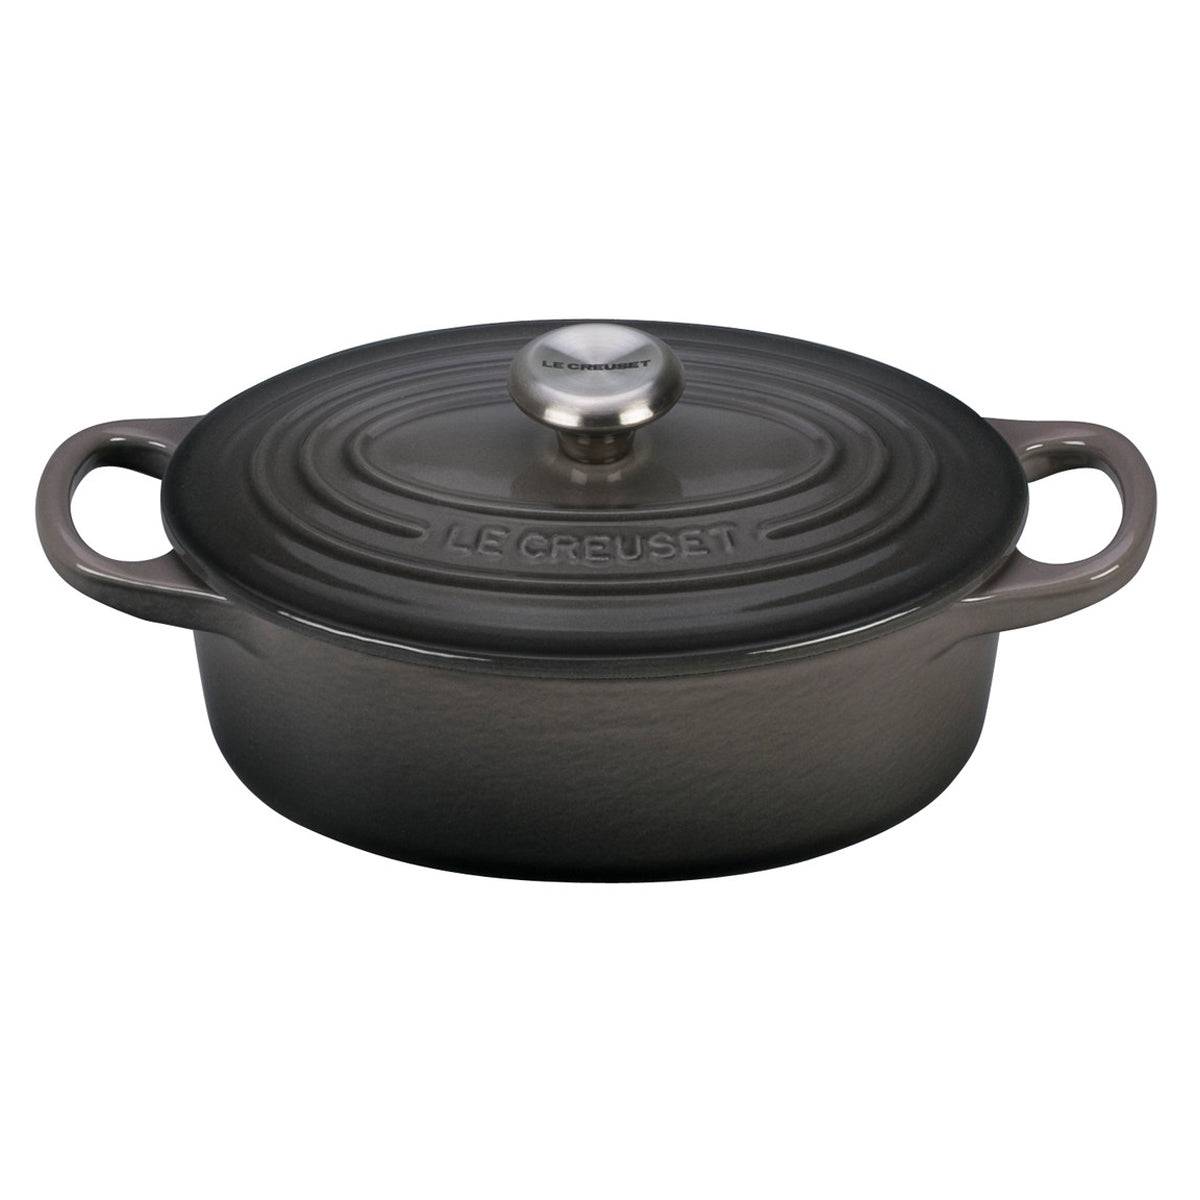 Le Creuset Signature Enameled Cast Iron Oval French / Dutch Oven, 5-Quart, Oyster - Kitchen Universe